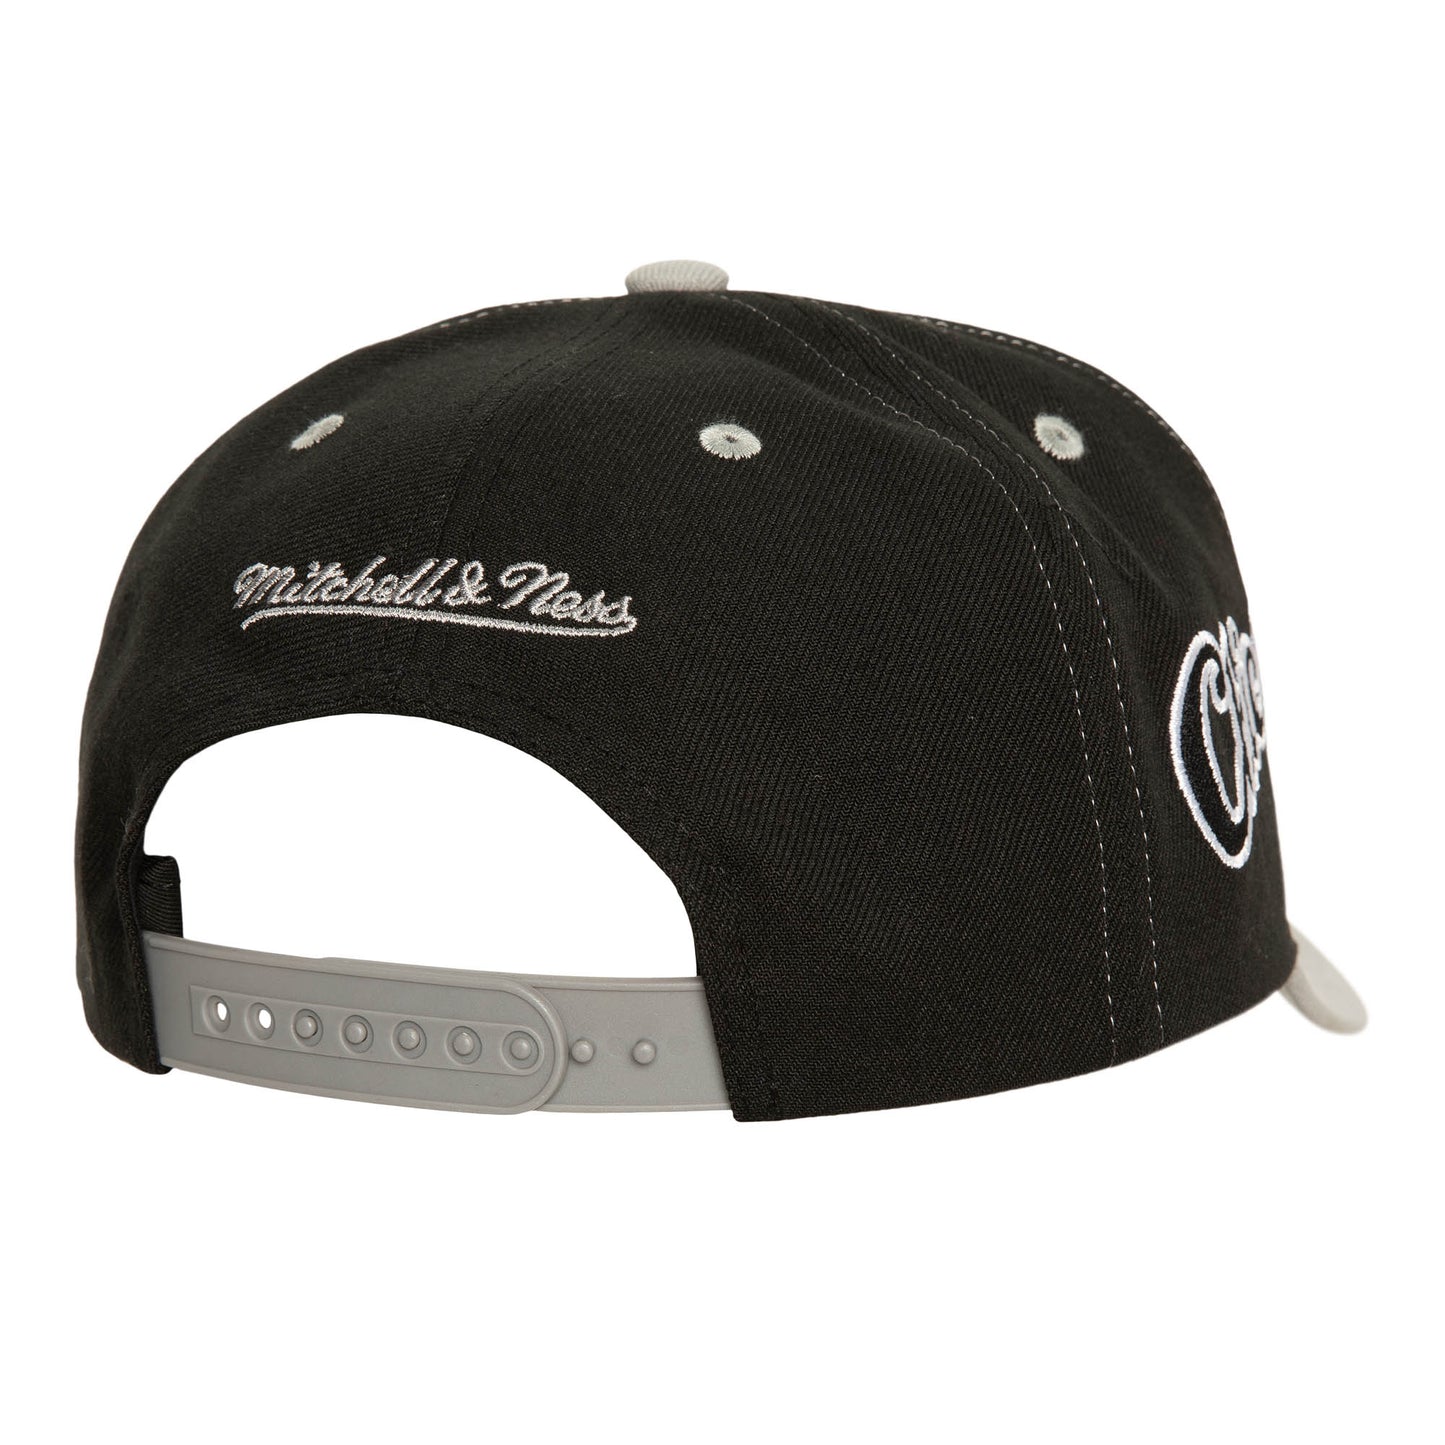 Chicago White Sox Mitchell & Ness Over Bite Pro Crown Snapback Hat